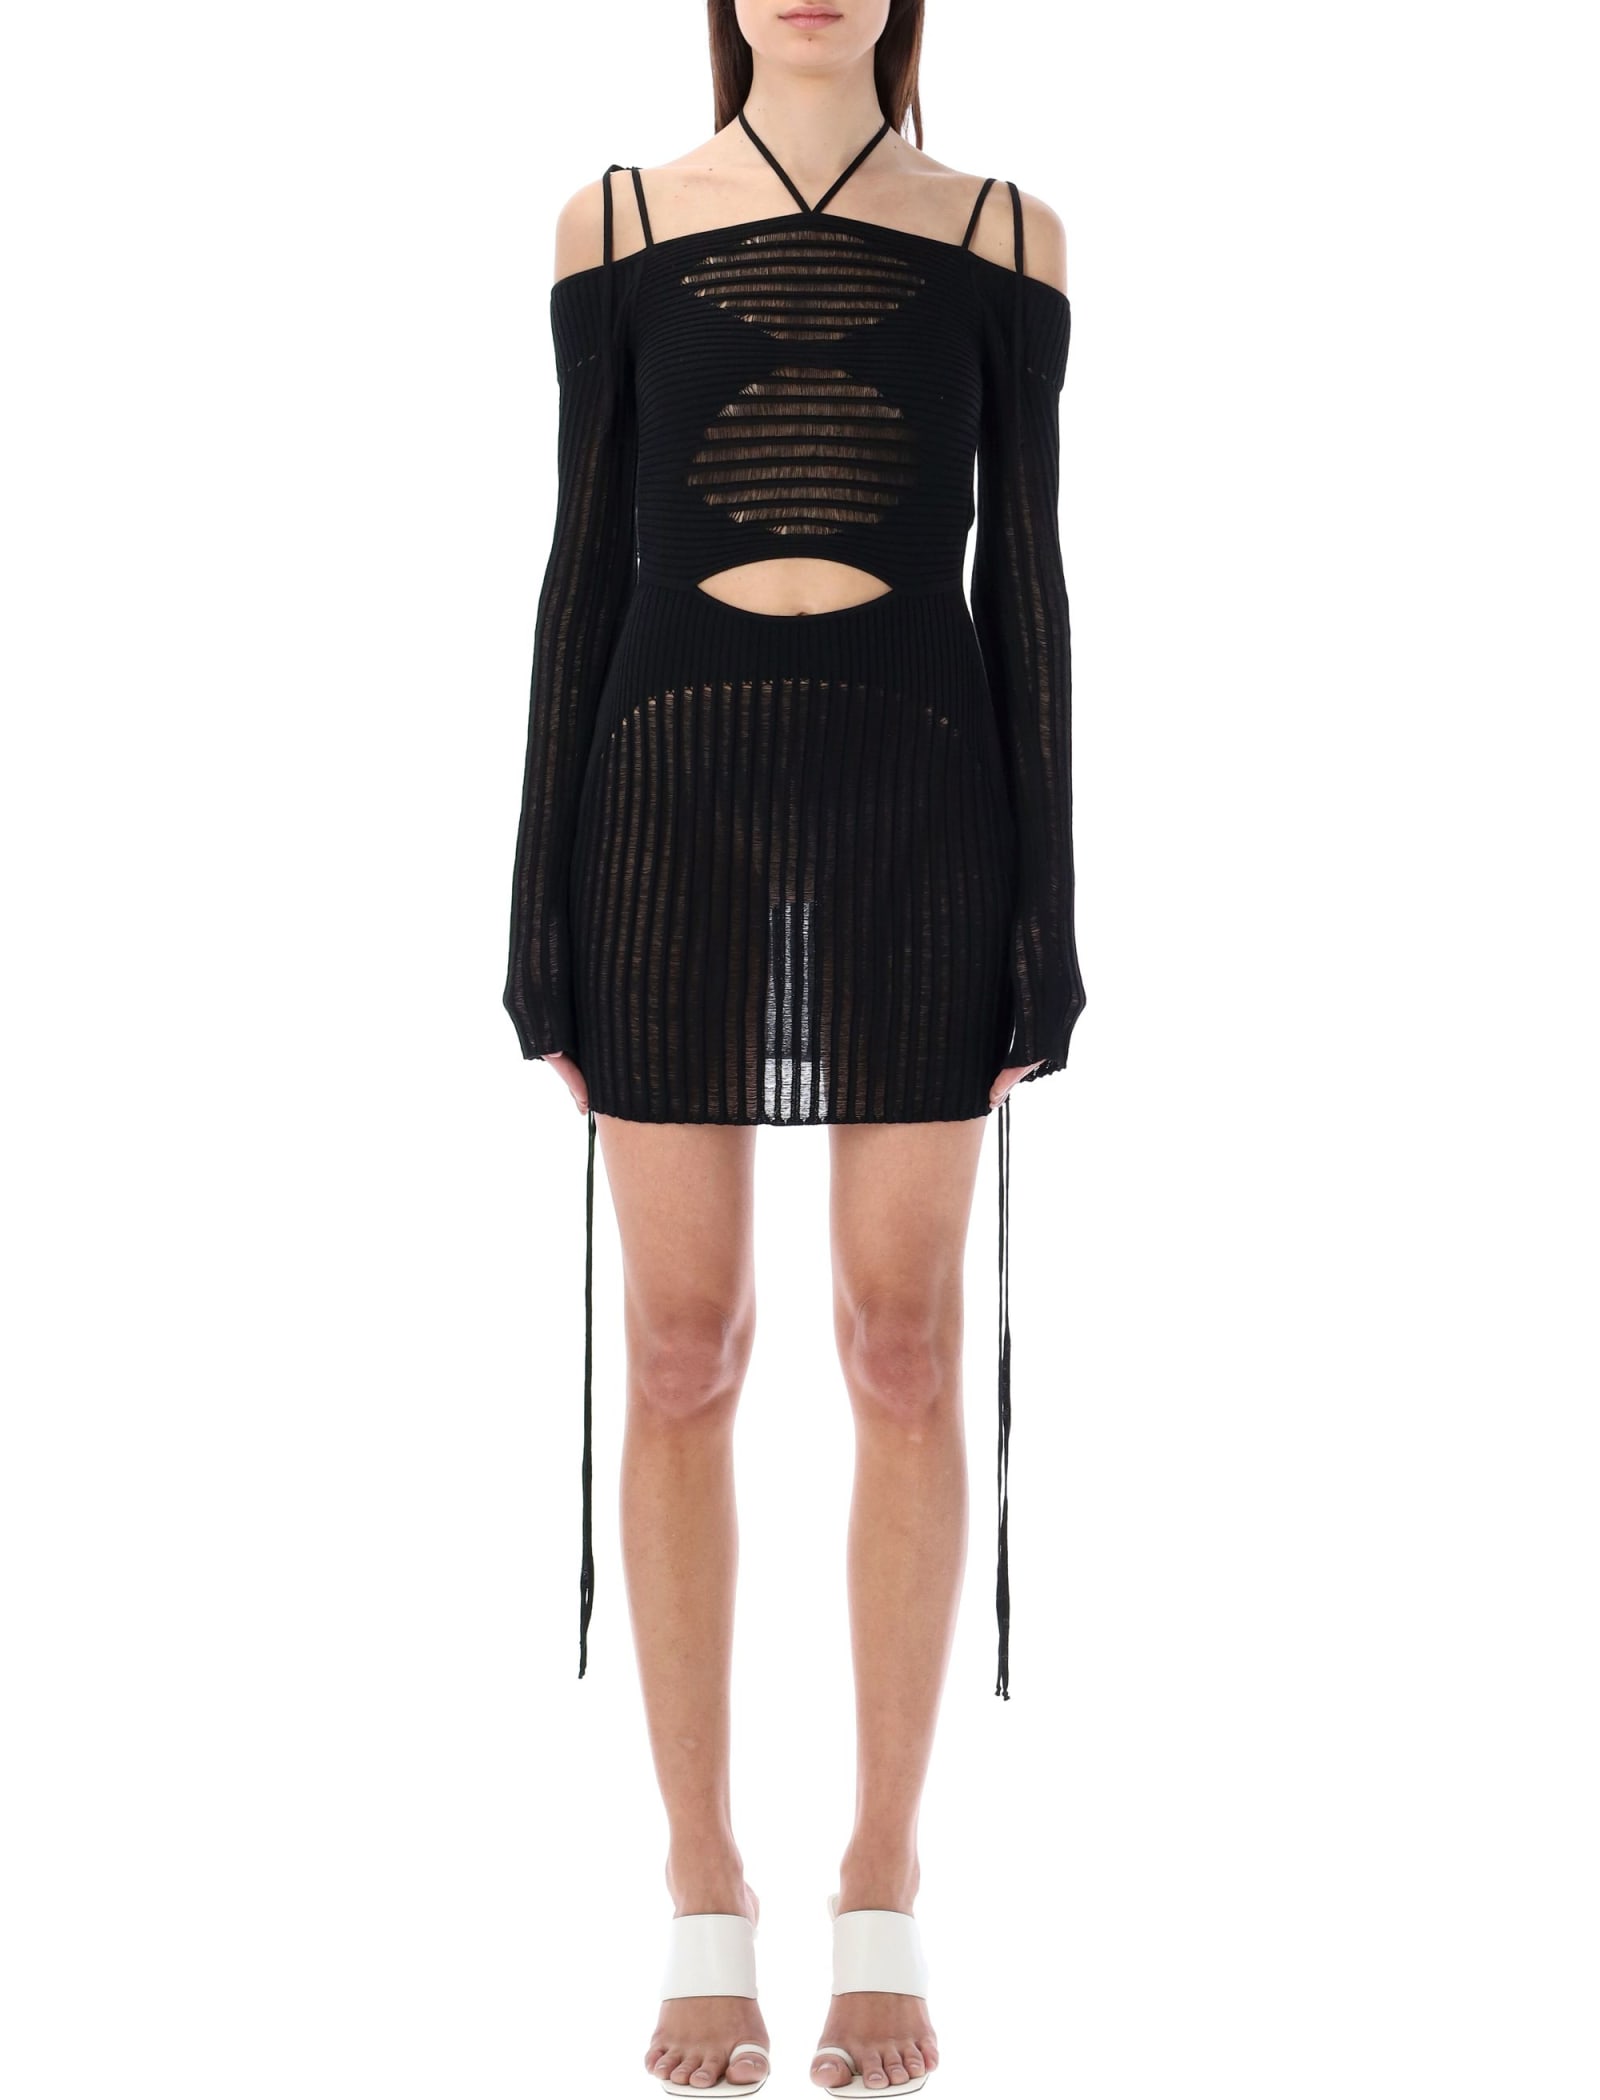 ANDREÄDAMO RIBBED KNIT MINI DRESS WITH CUT-OUT